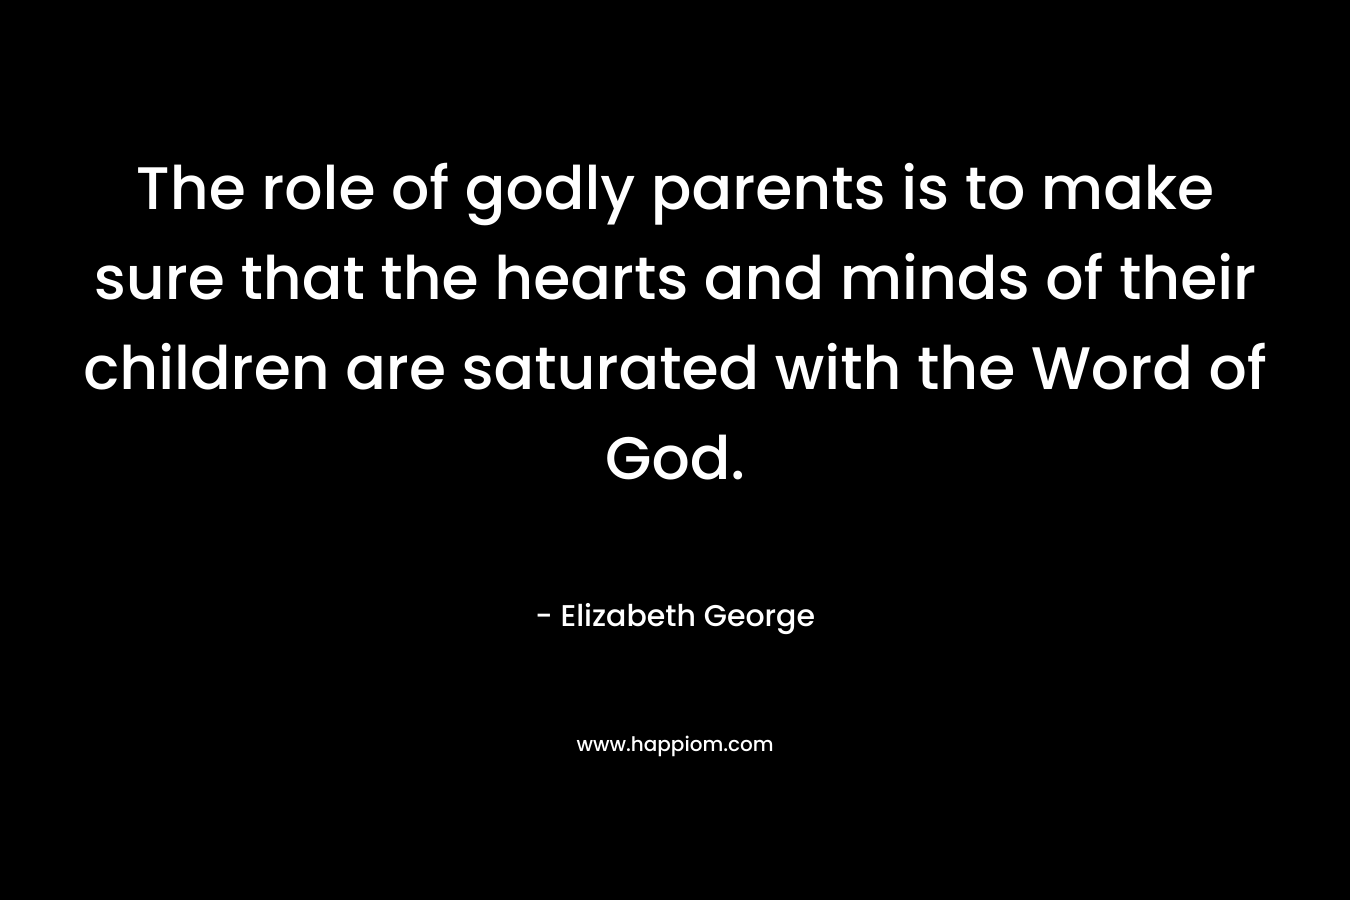 The role of godly parents is to make sure that the hearts and minds of their children are saturated with the Word of God.